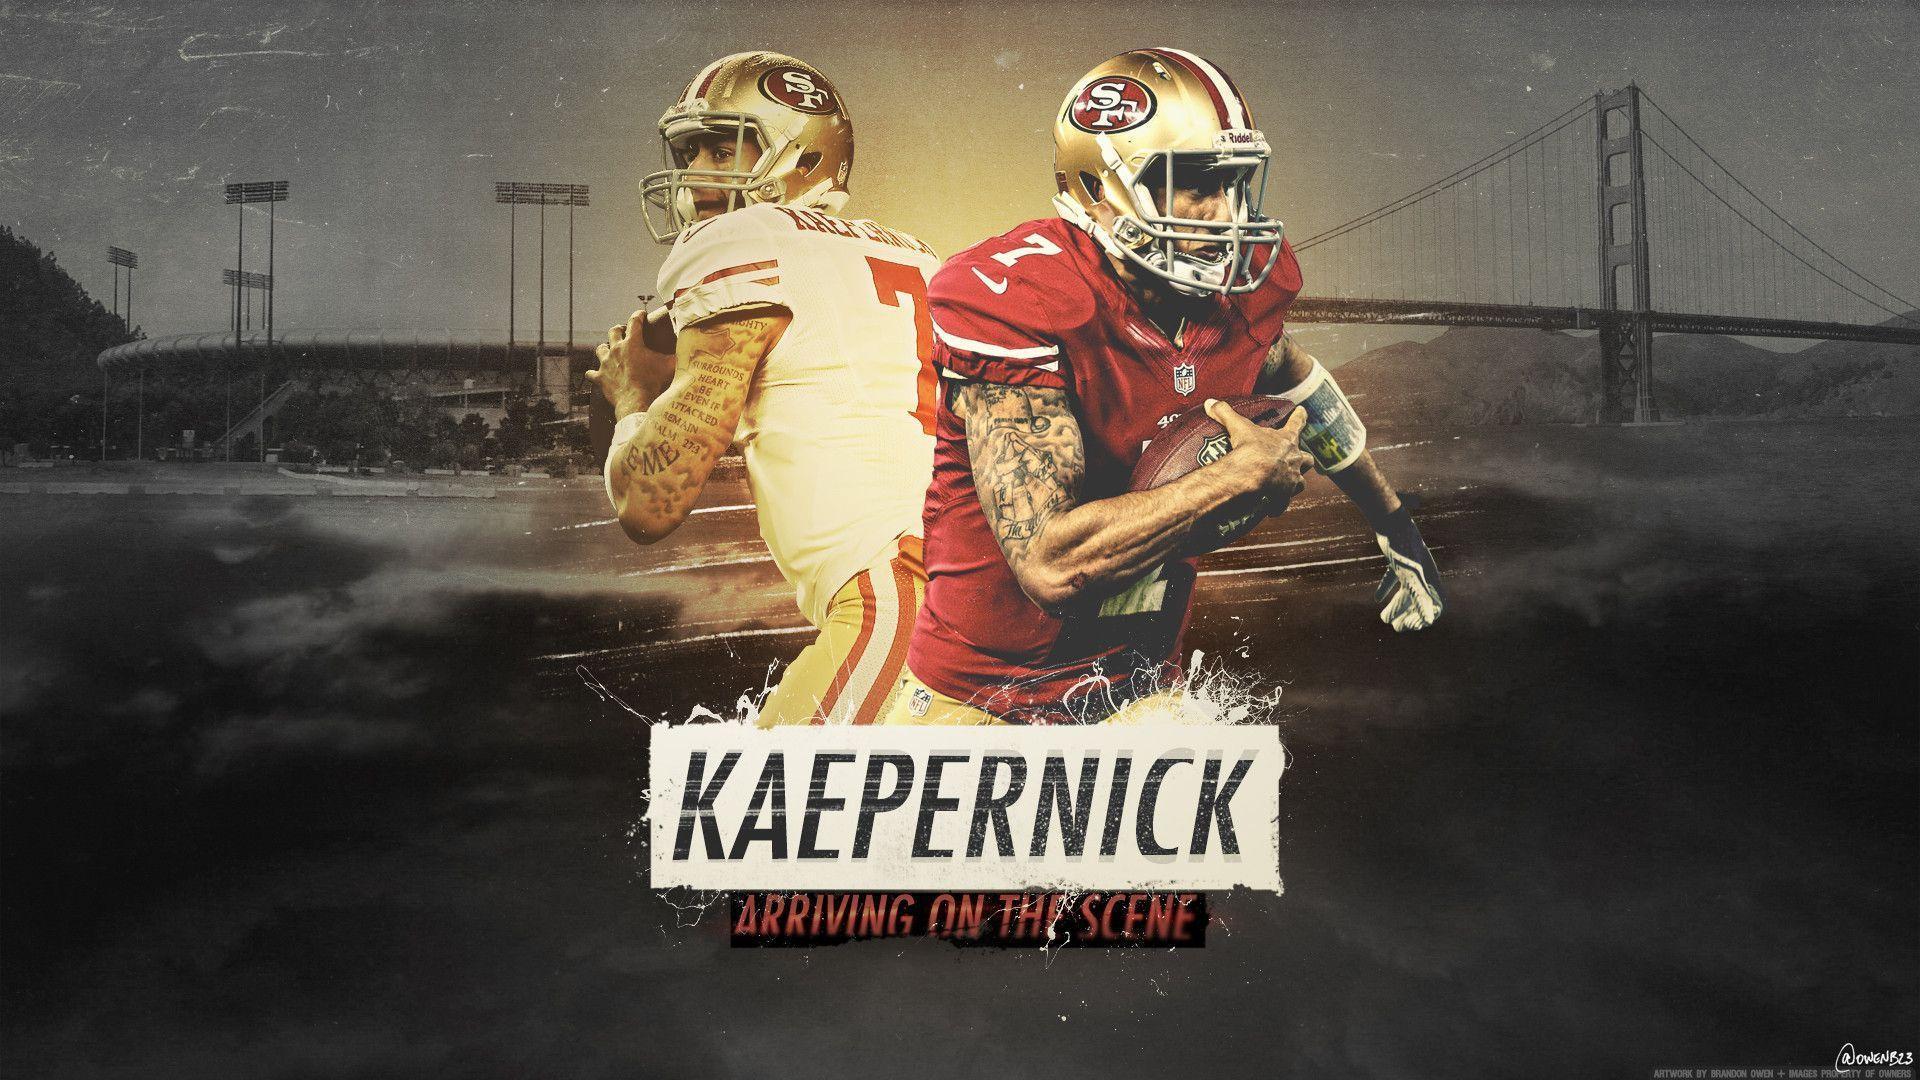 49ers picture wallpaper 6 - Image And Wallpaper free to